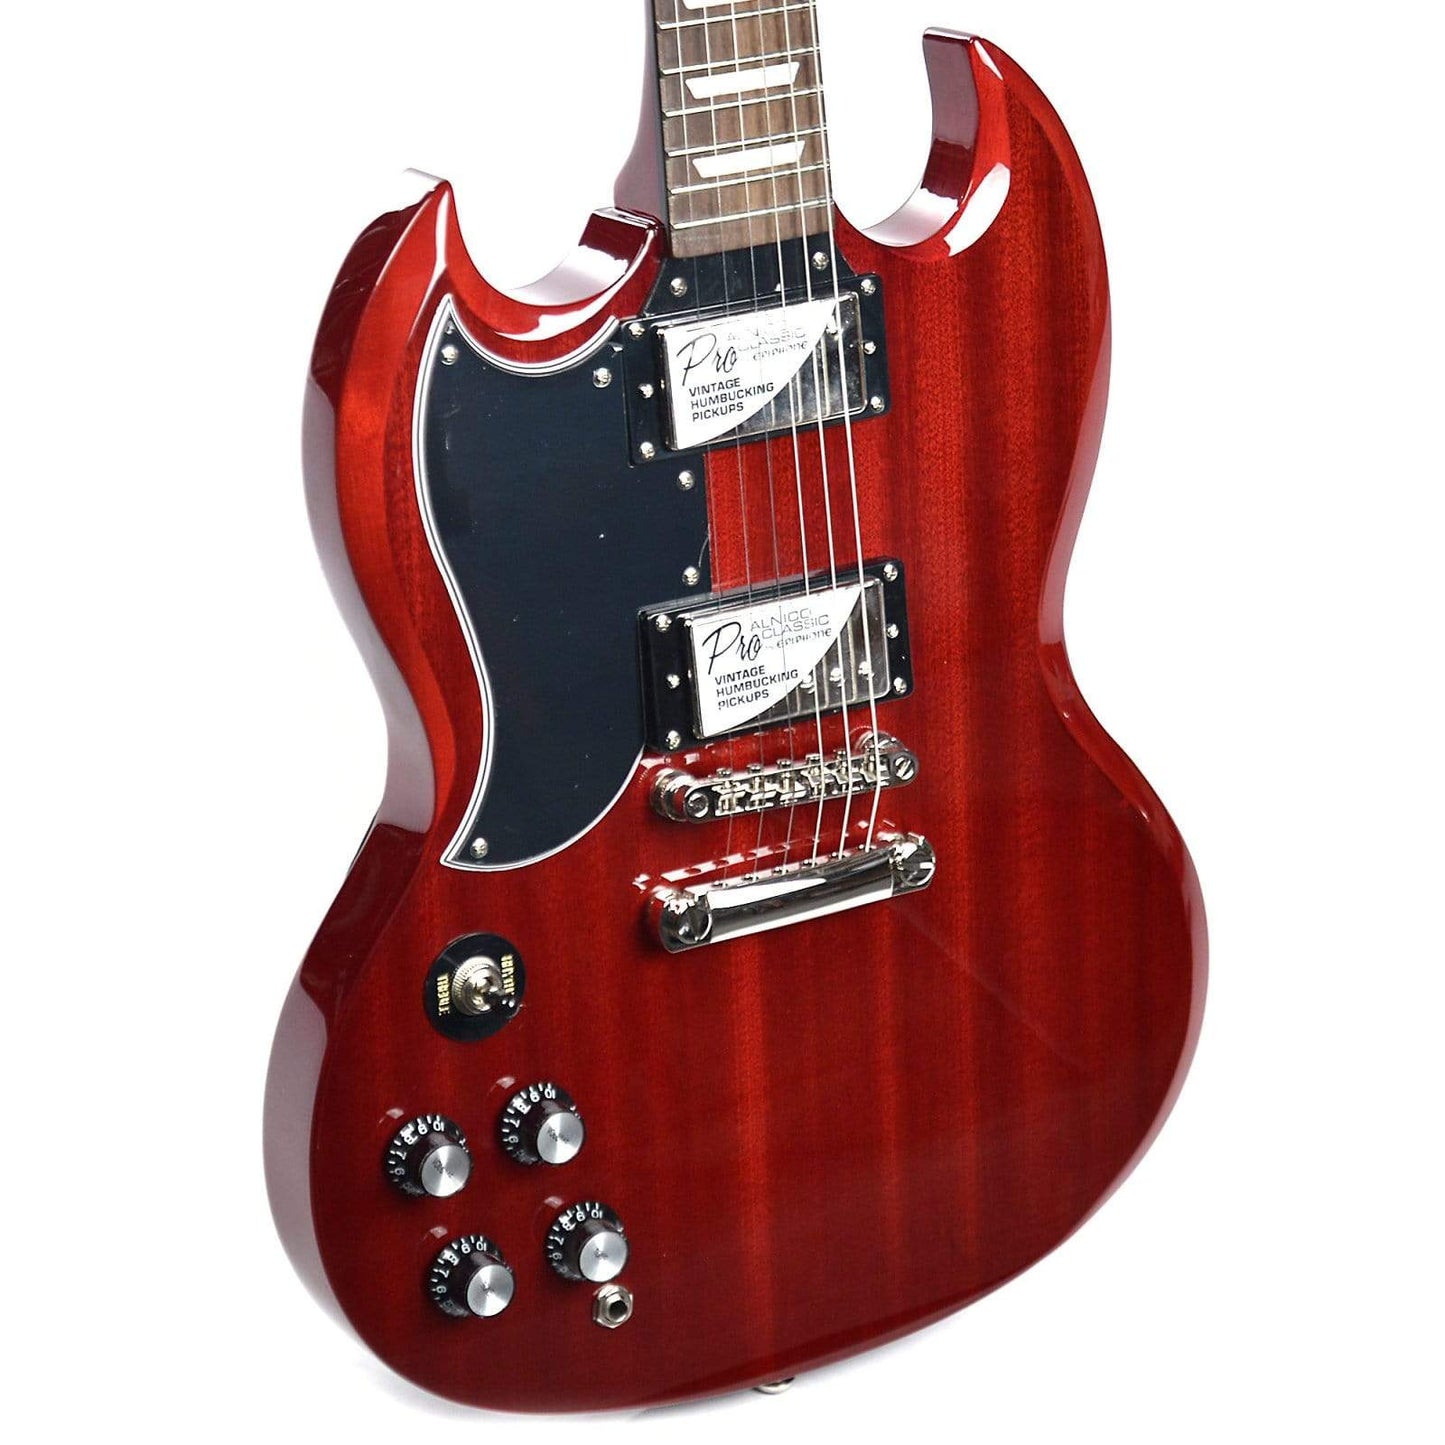 Epiphone G-400 Pro LEFTY Cherry Electric Guitars / Left-Handed